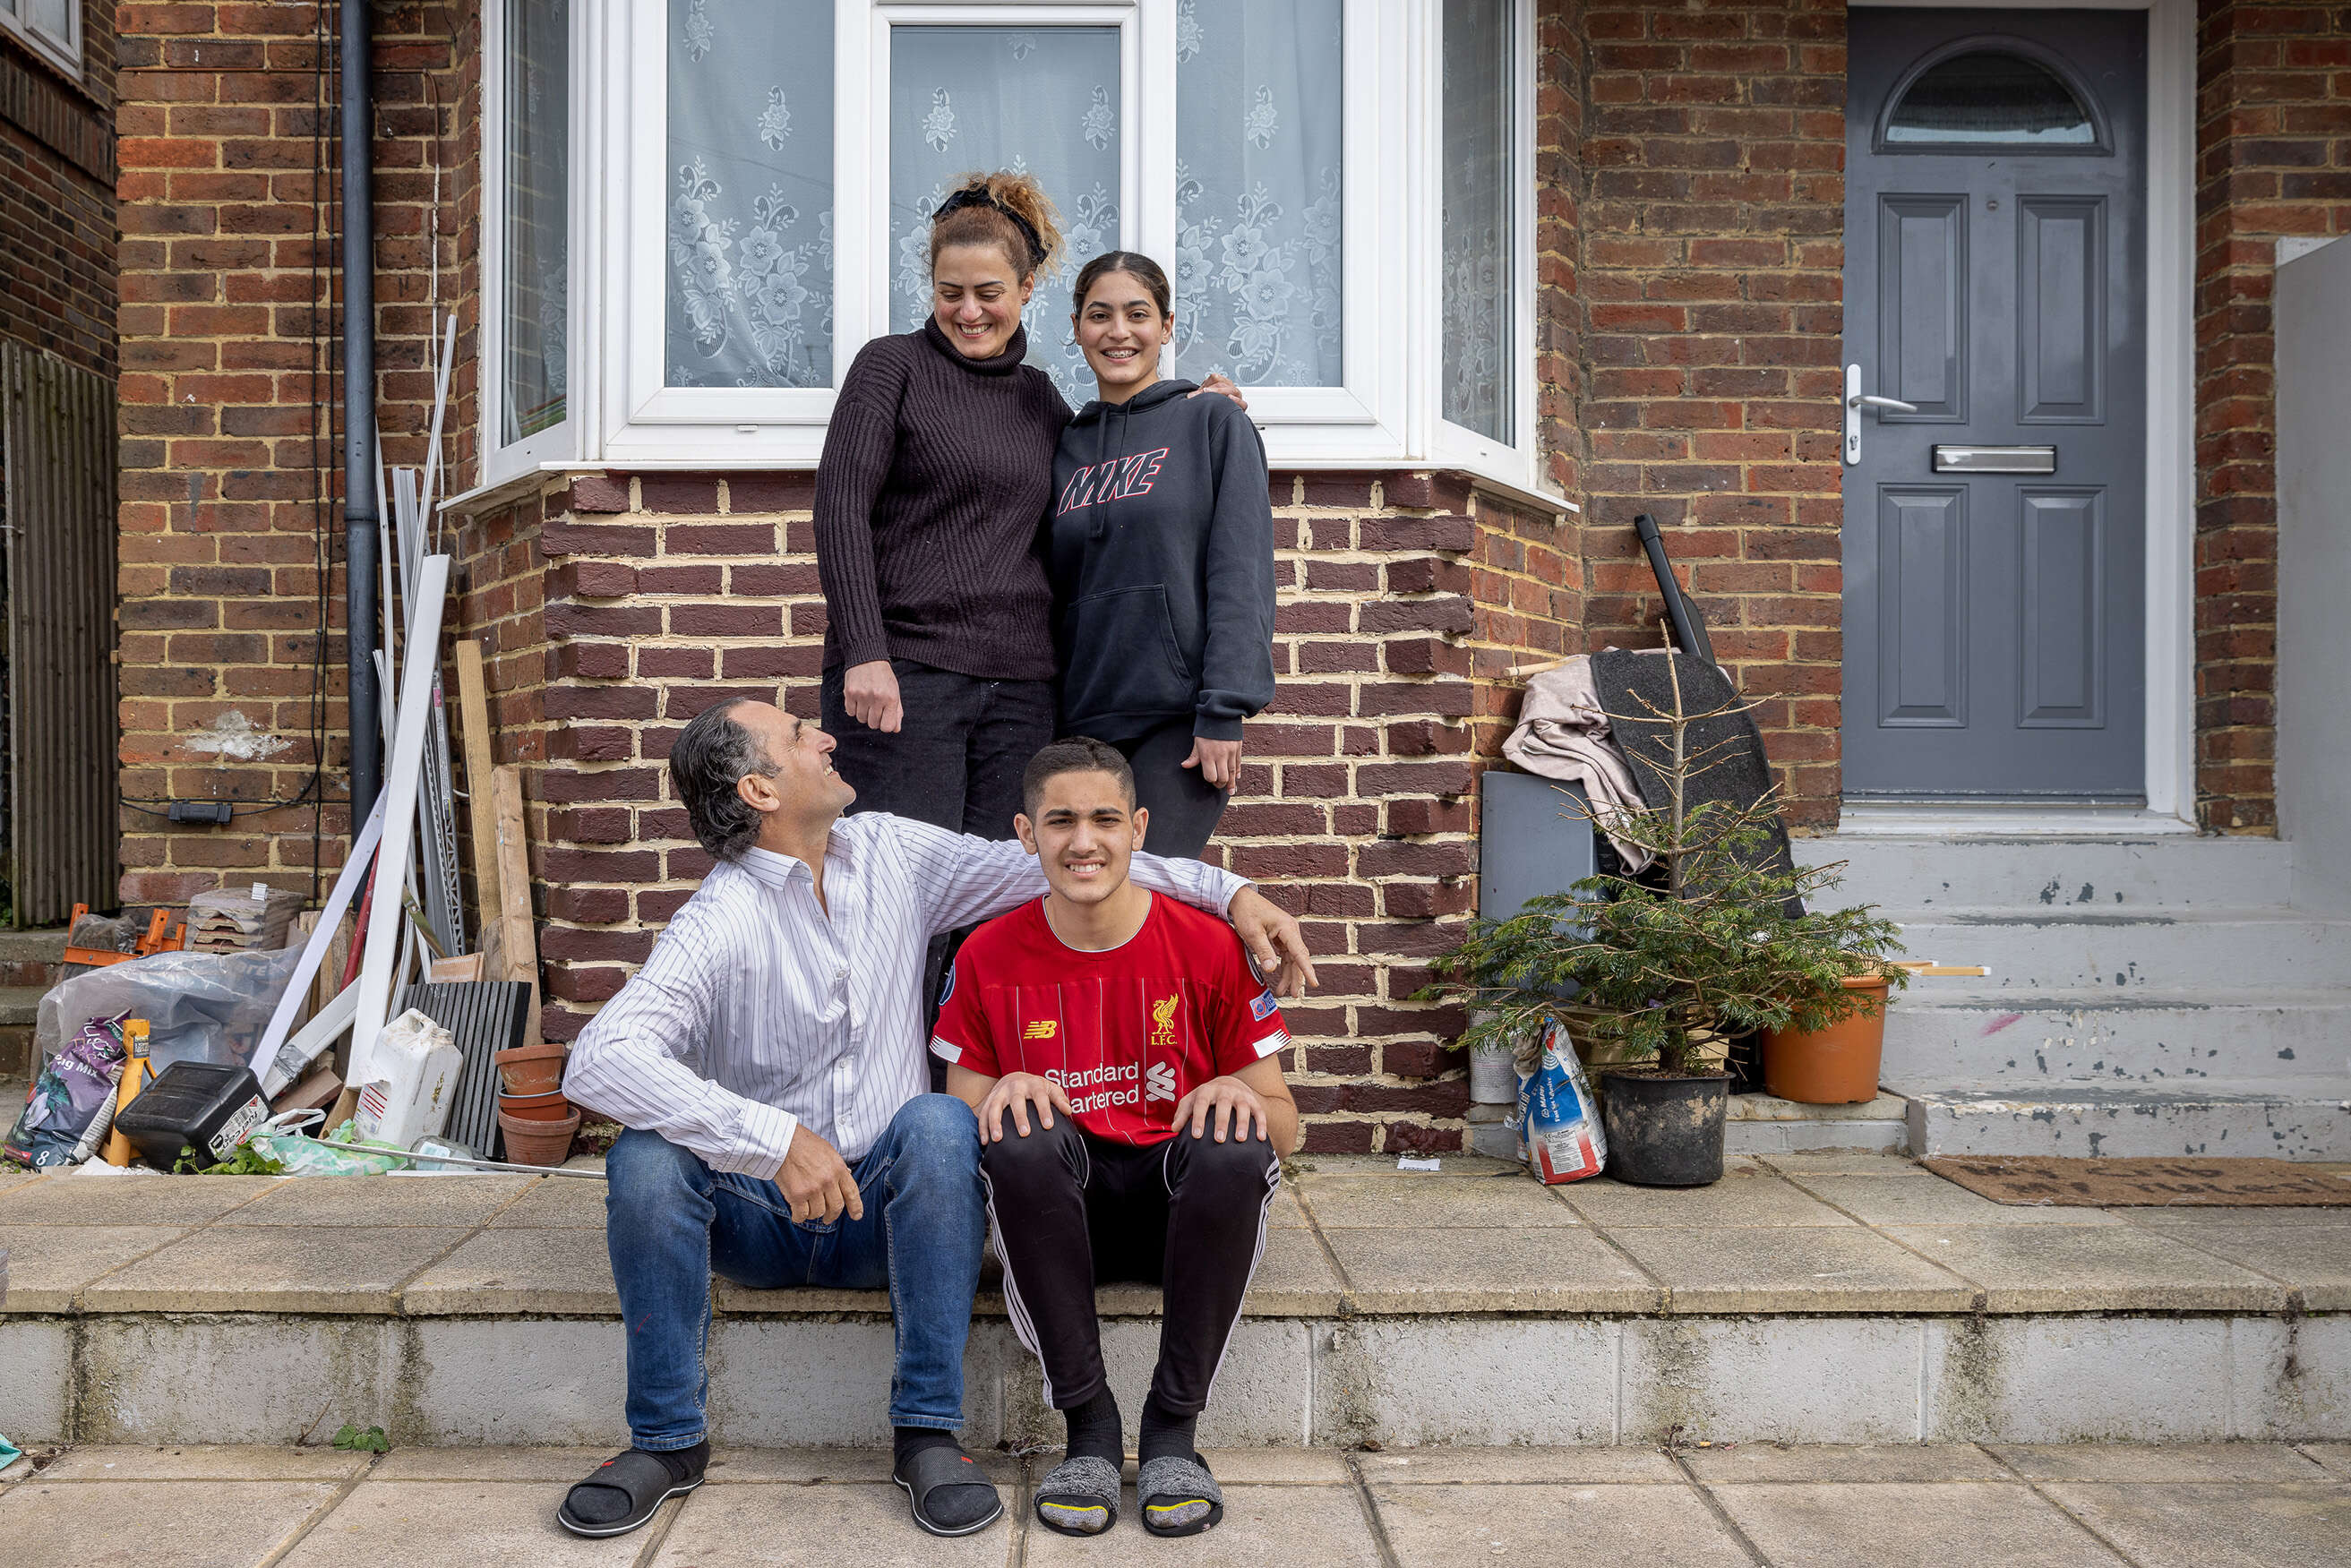 Chadia with her daughter Nour, husband Mazen and son Zain outside their home in Brighton.